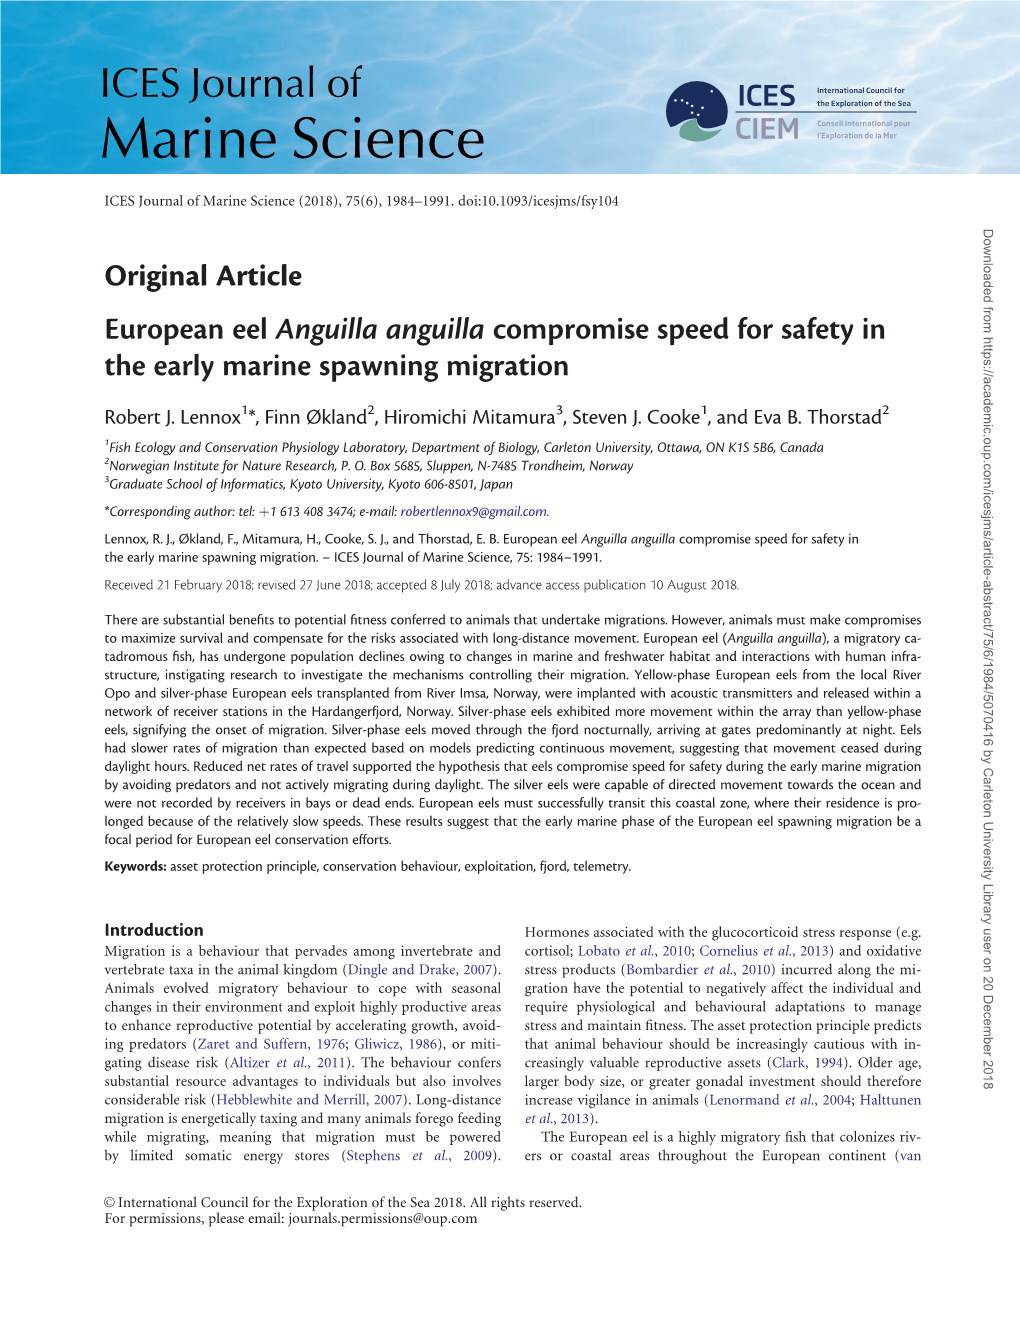 Original Article European Eel Anguilla Anguilla Compromise Speed for Safety in the Early Marine Spawning Migration